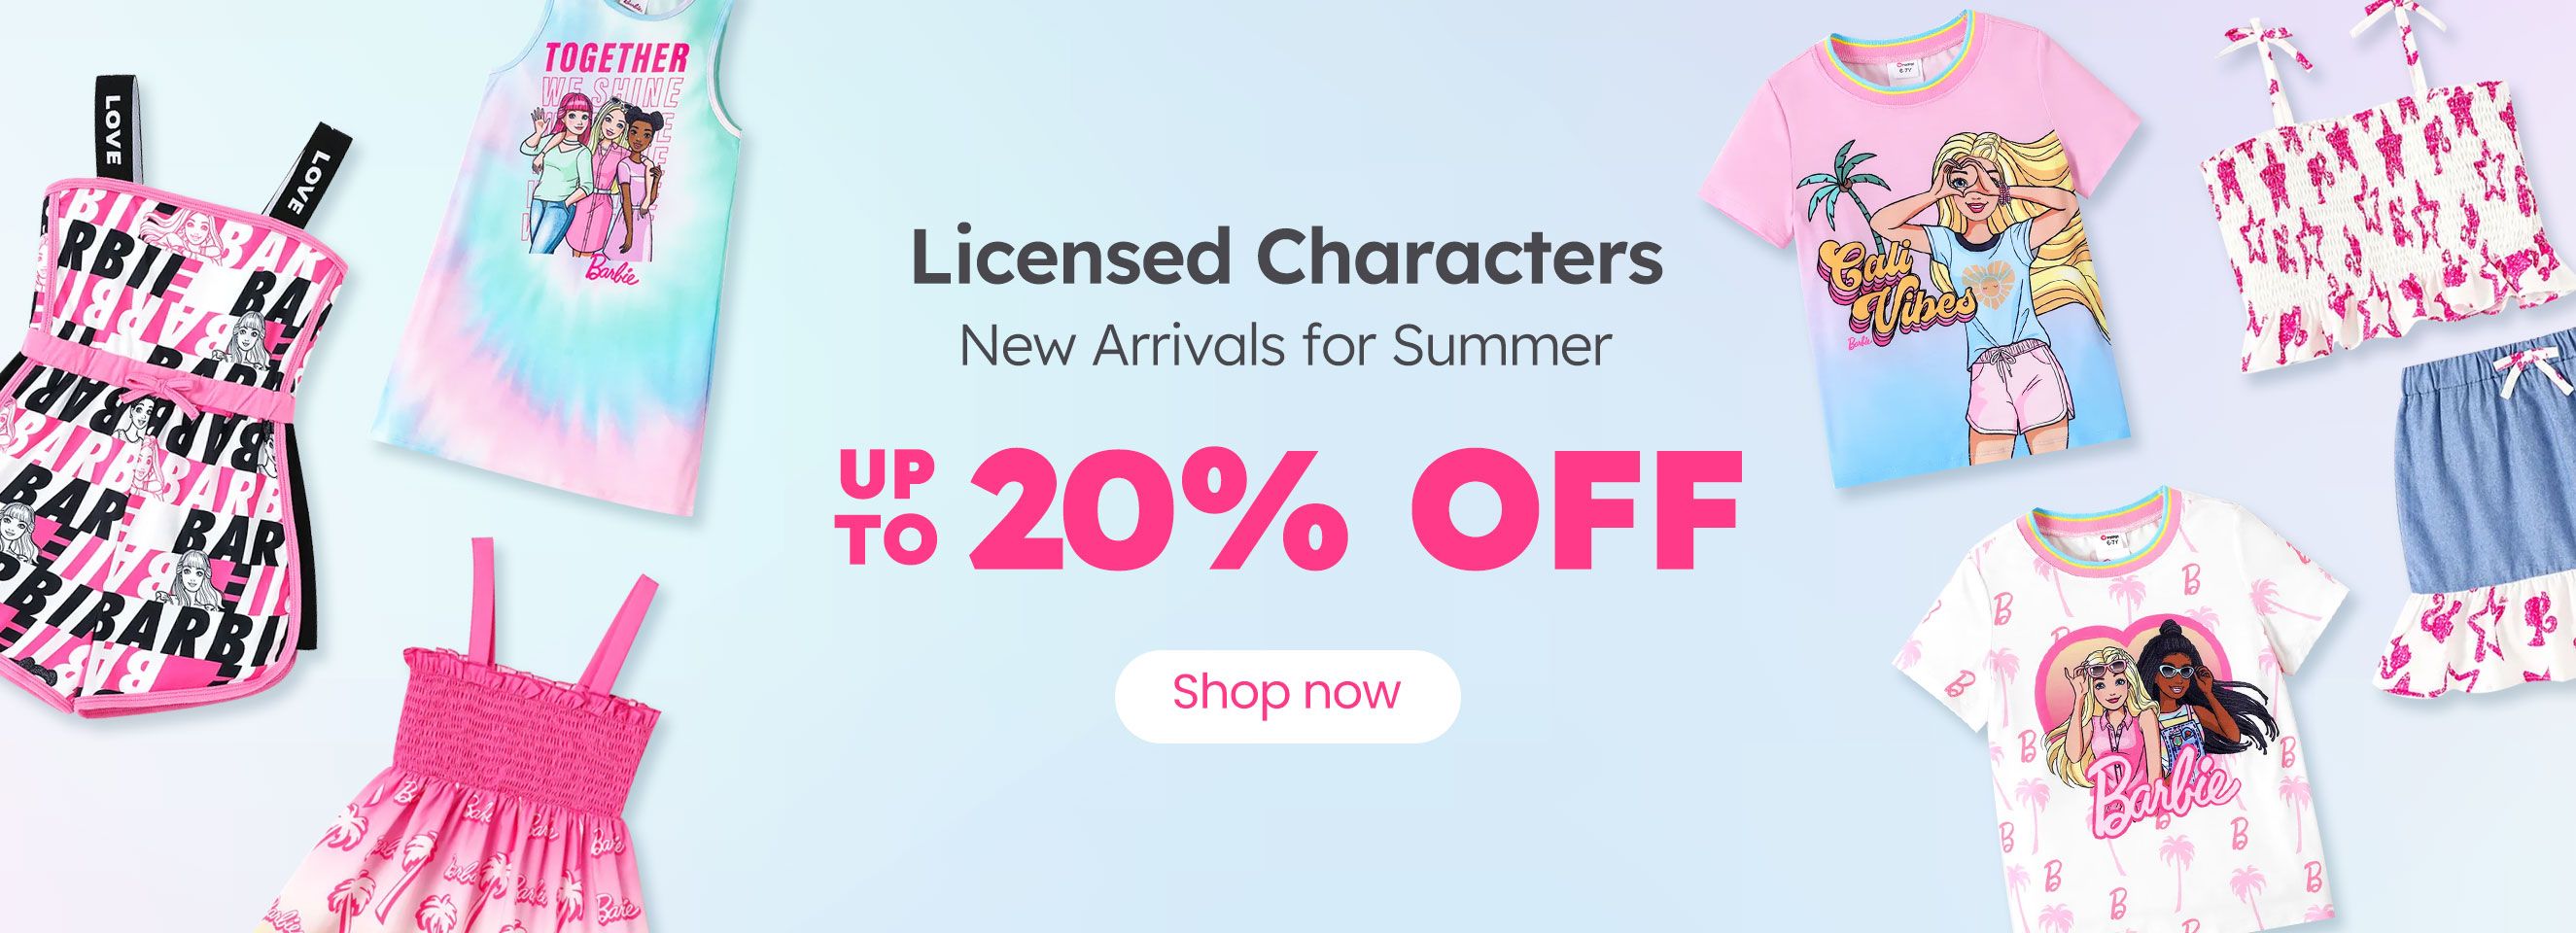 Click it to join Licensed Characters activity